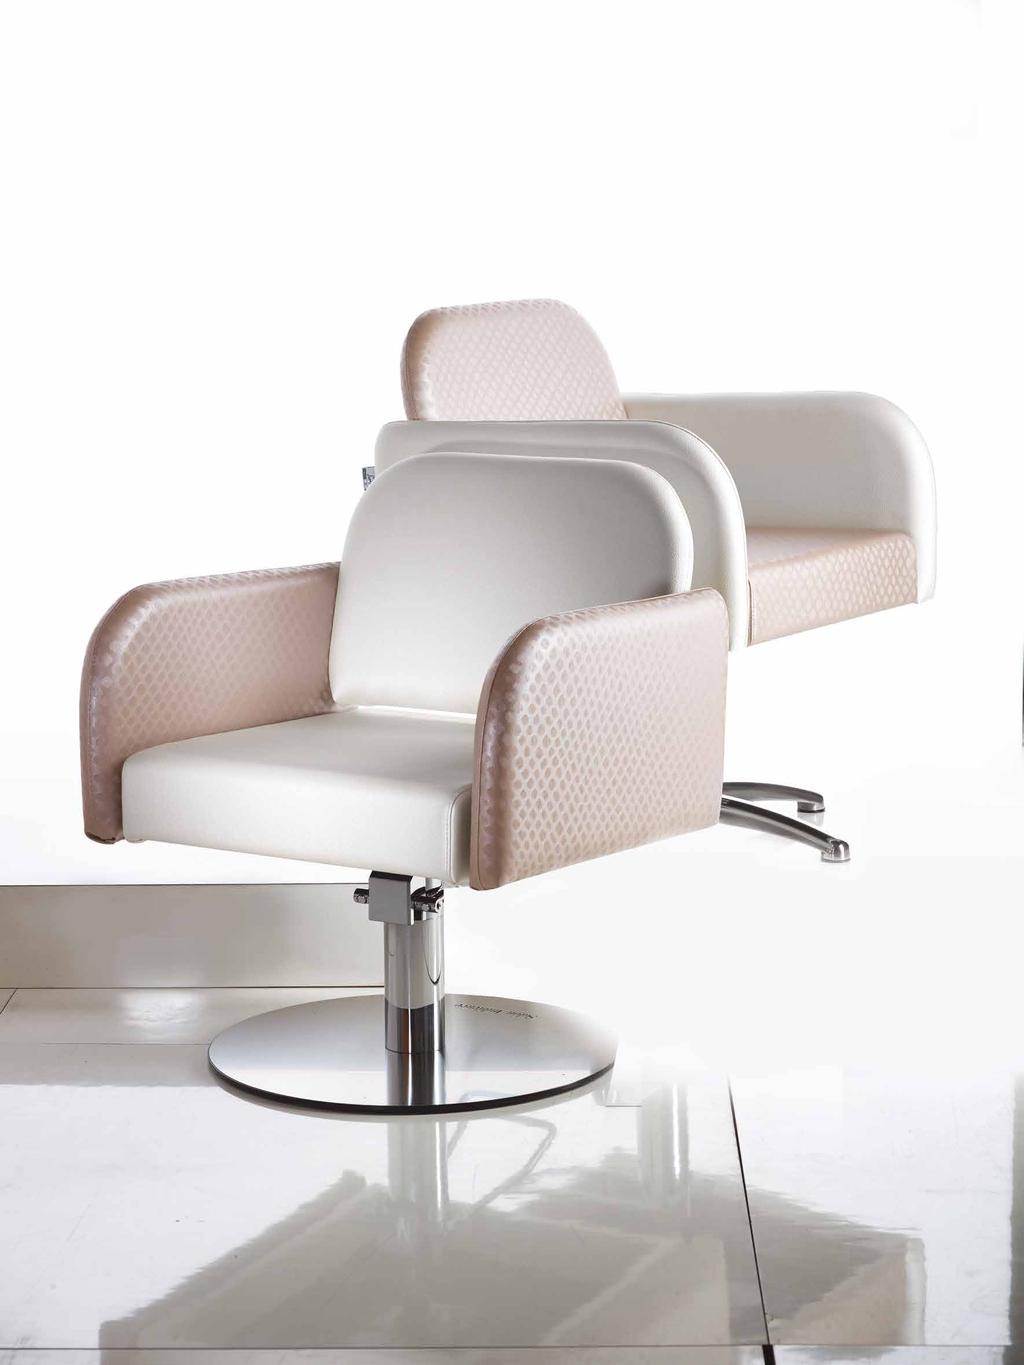 The ample foam padding makes the chair particularly comfortable, giving a truly